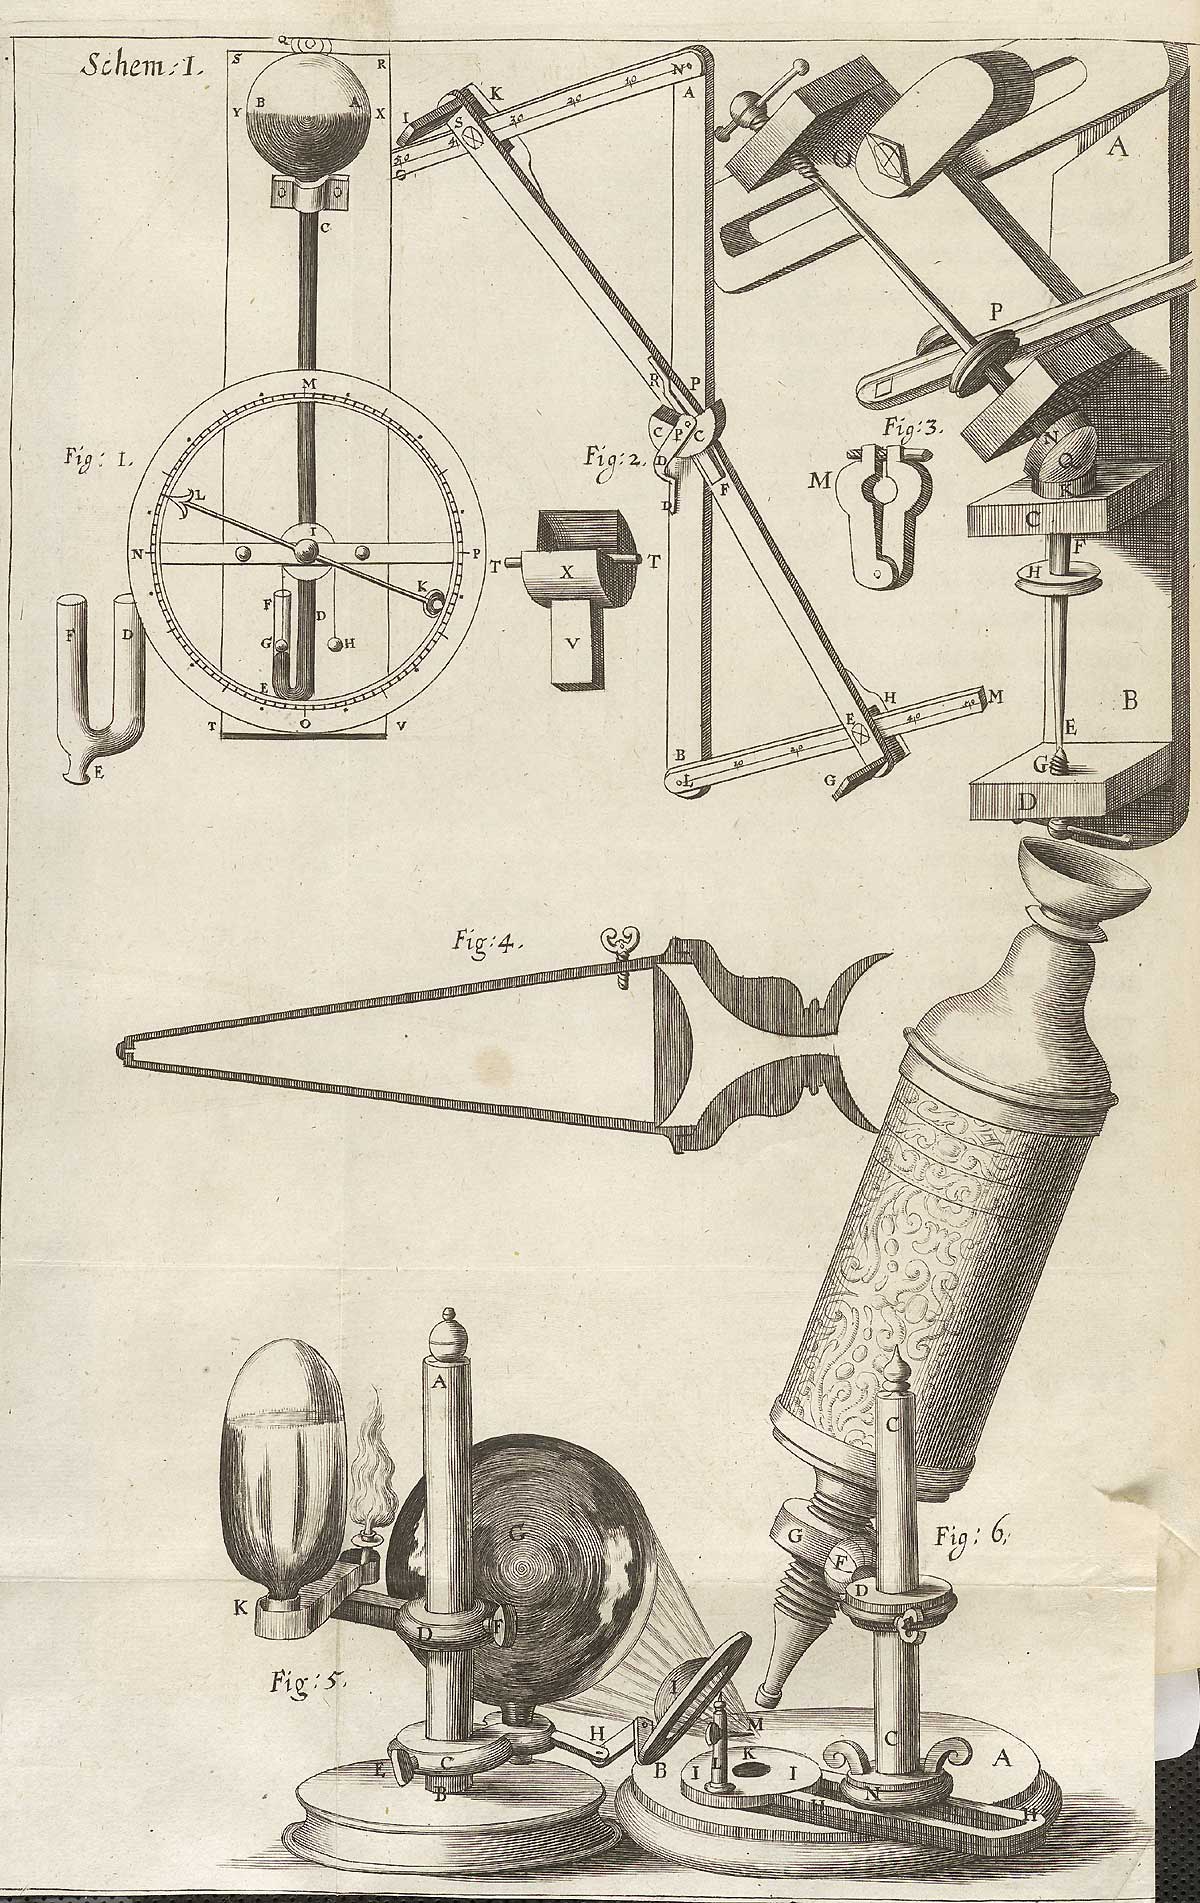 Engraving of Robert Hooke’s microscope at bottom right of page, with other parts of the apparatus in the top half of the page.